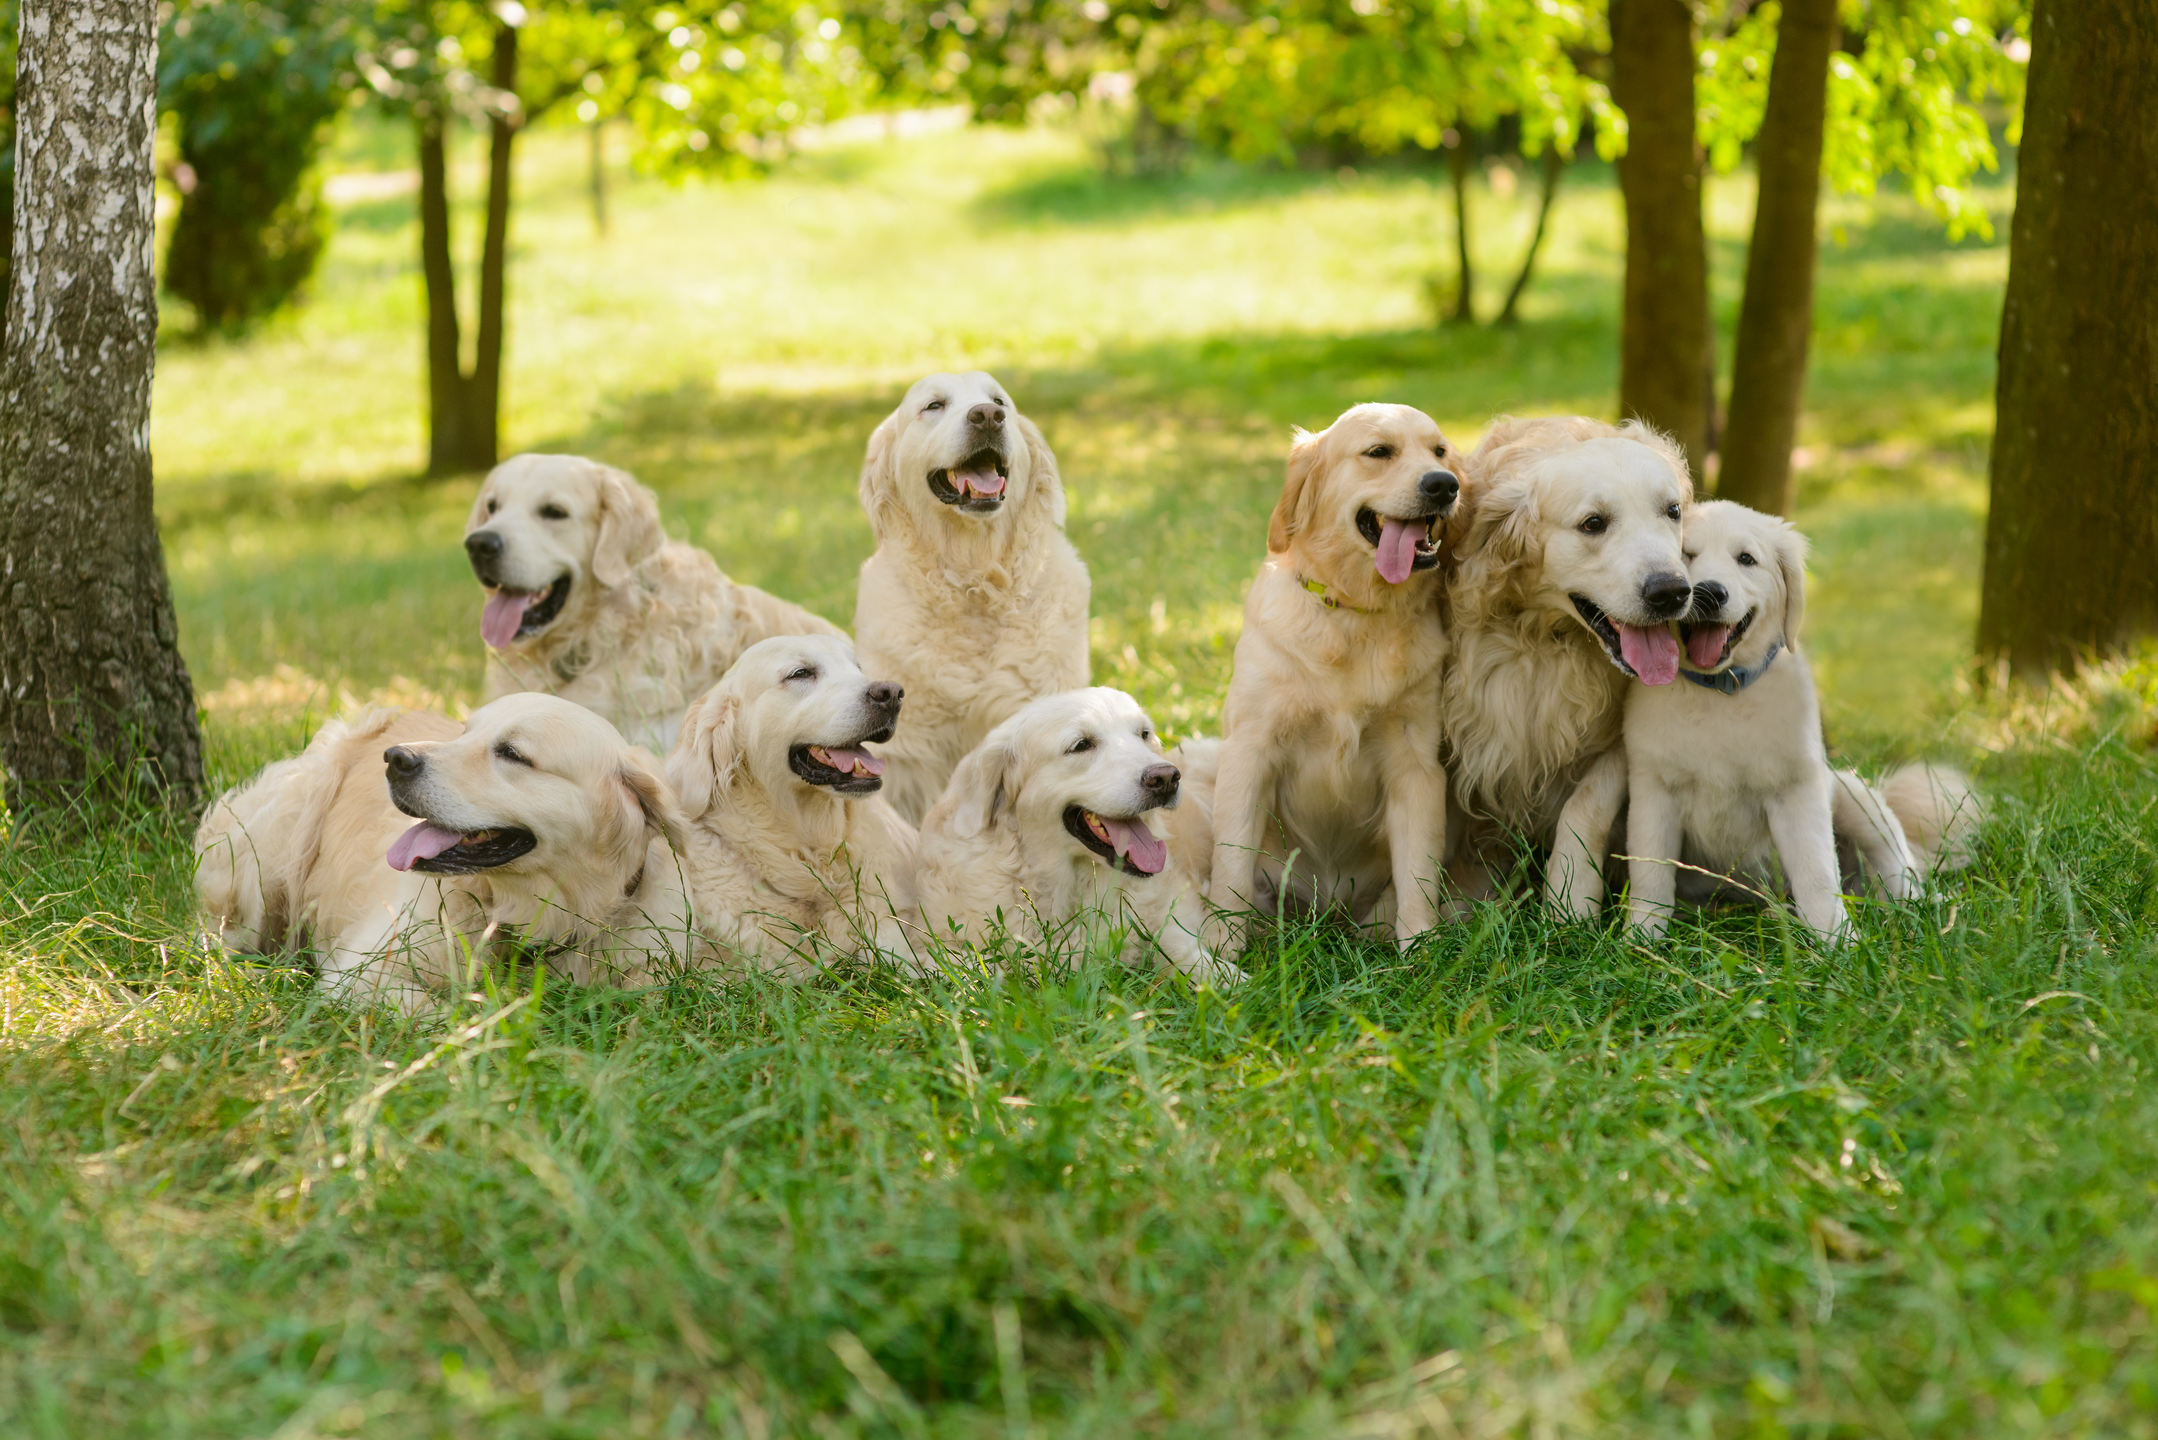 Unmistakable signs you are a crazy Golden retriever person (and are proud of it)